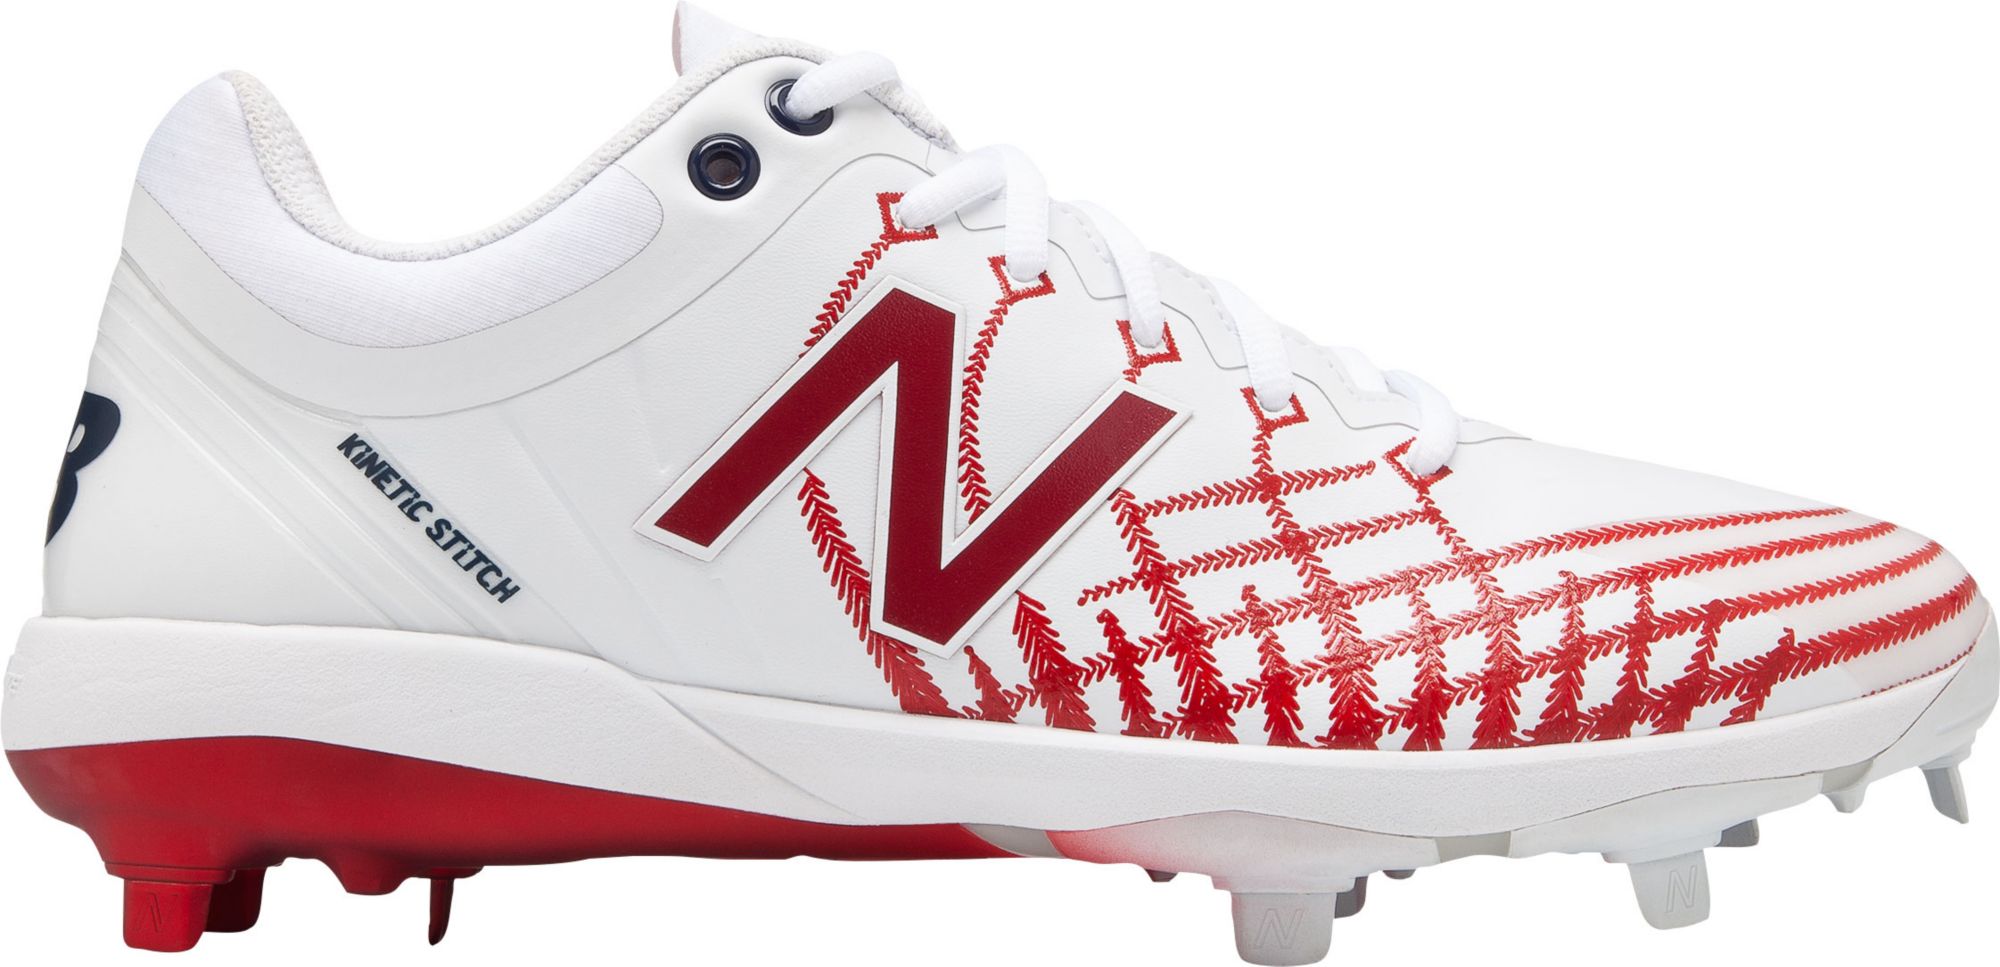 new balance metal cleats clearance, OFF 